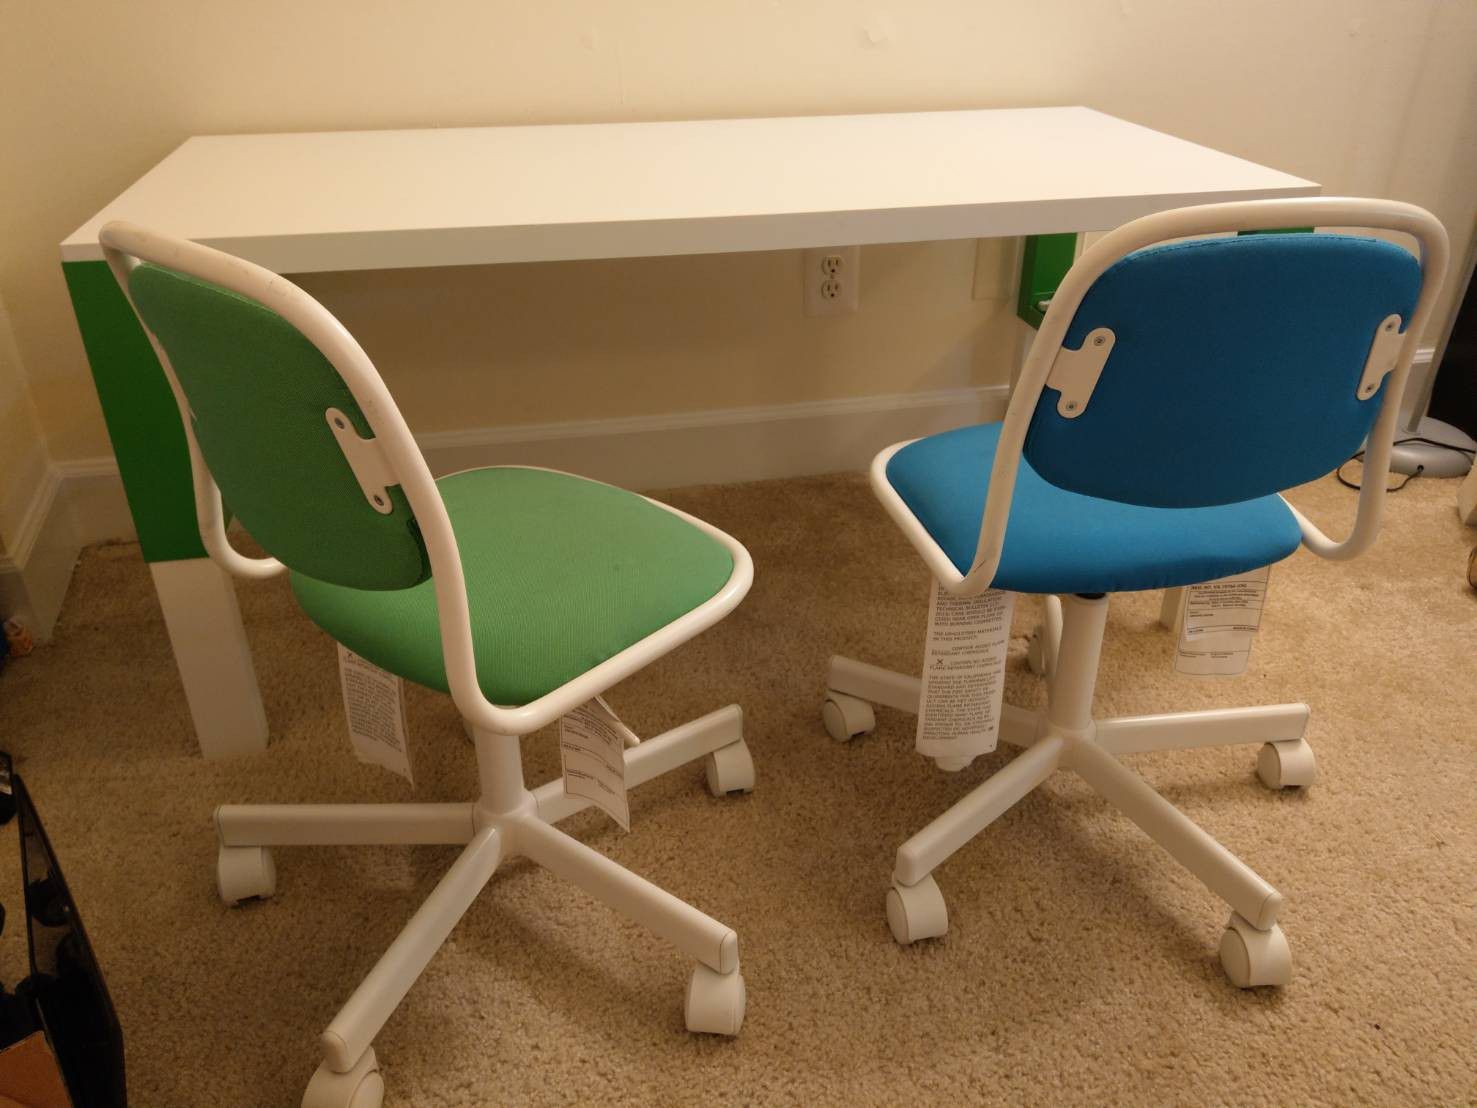 Ikea Pahl desk, Orfjall swival chairs